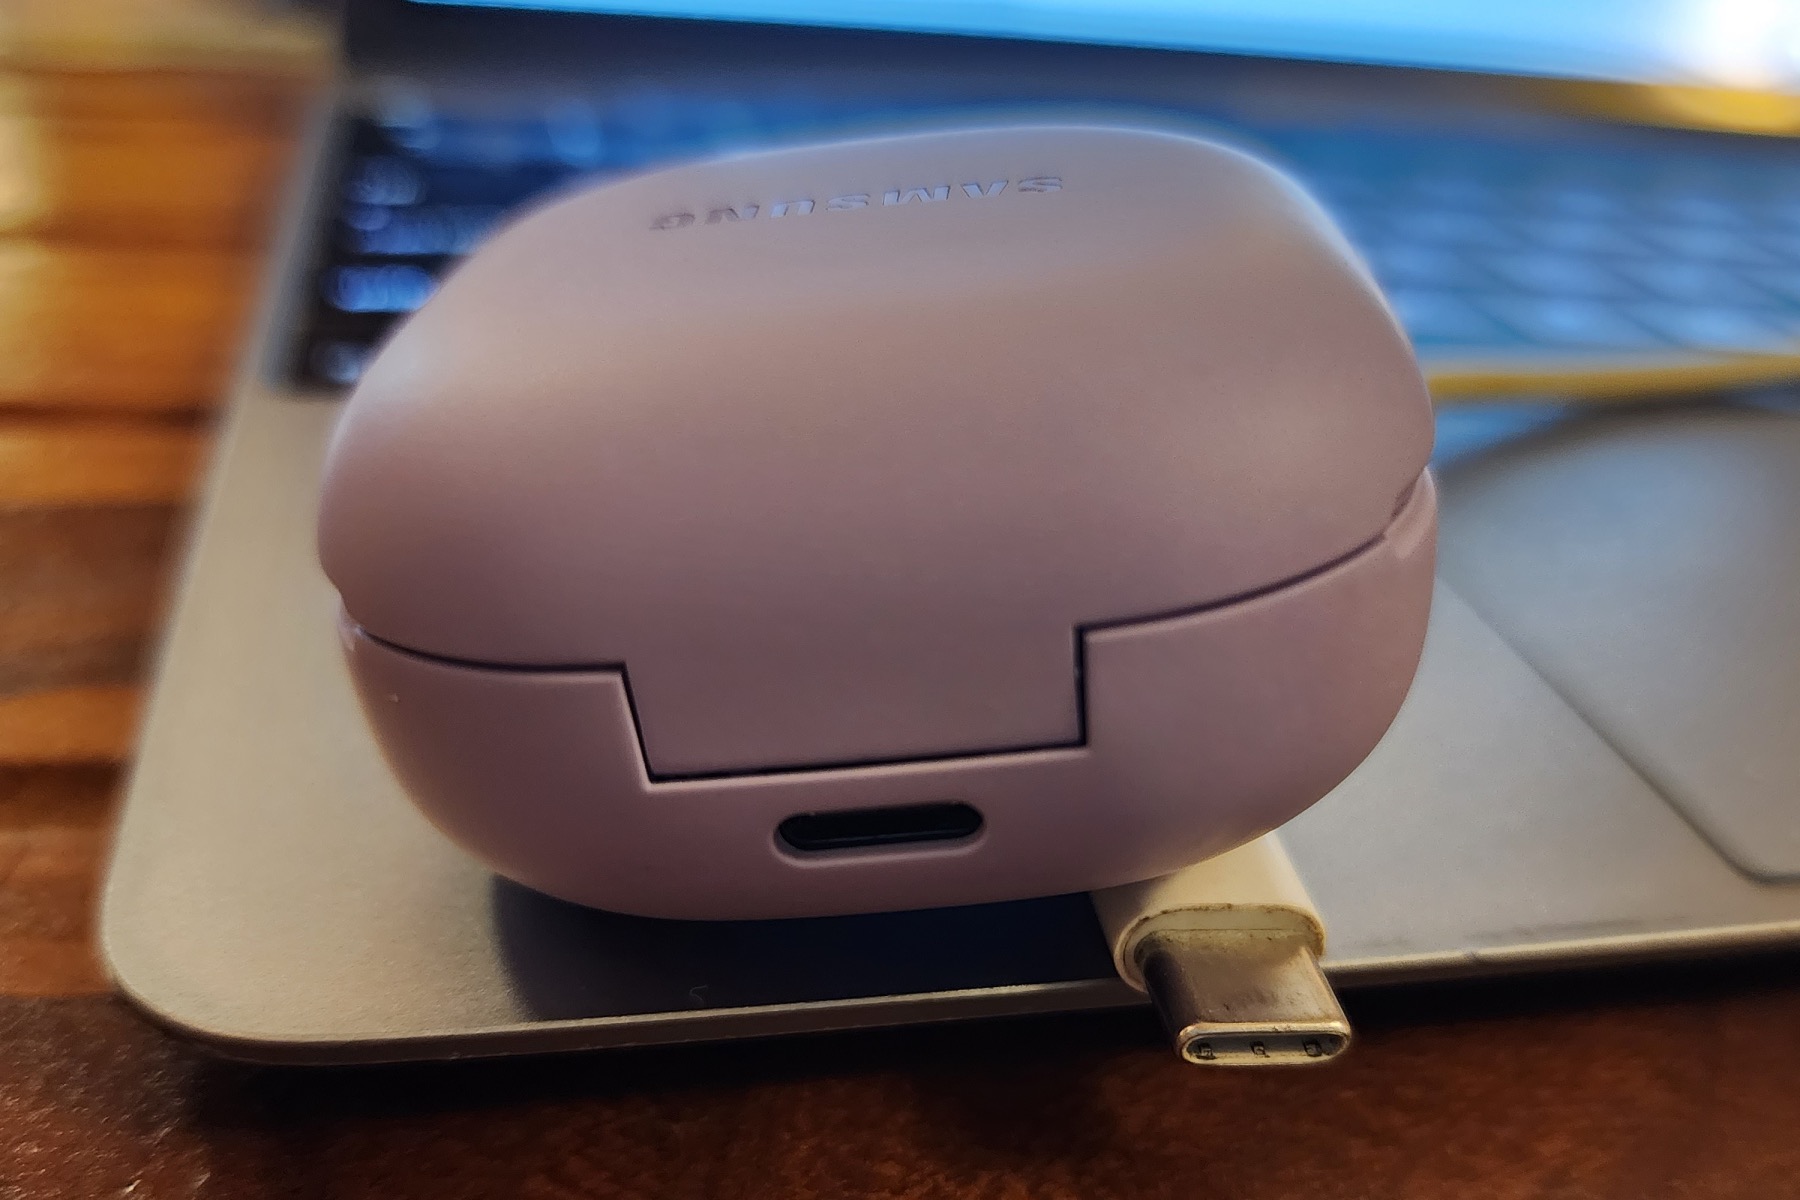 Samsung Galaxy Buds 2 Pro with a USB-C cable.